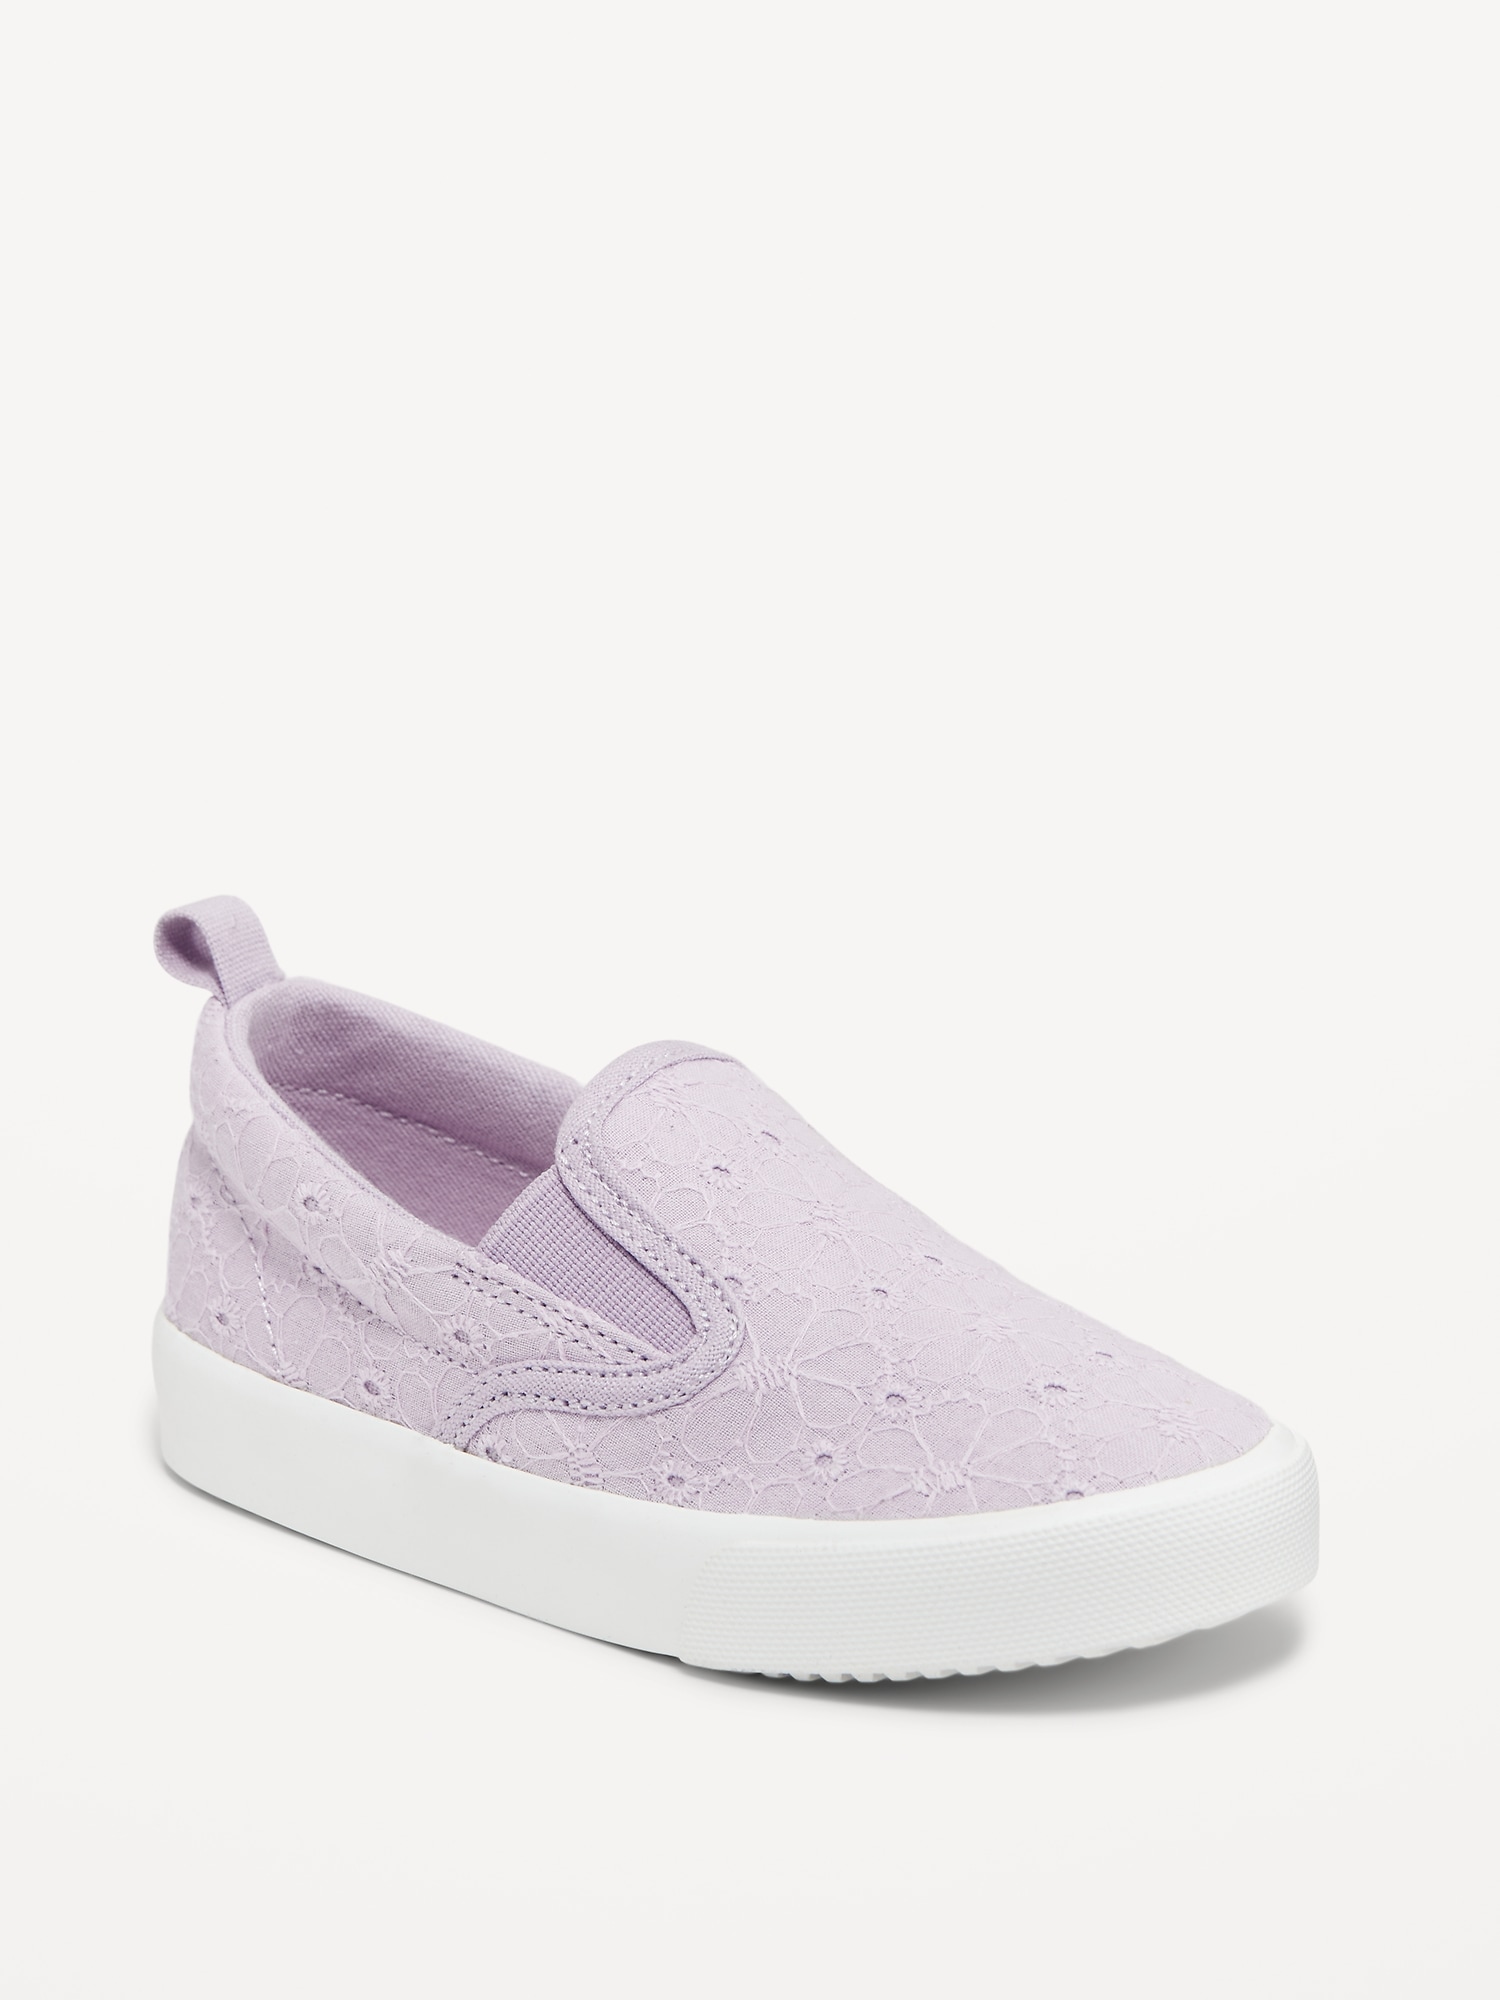 Canvas Slip-Ons for Toddler Girls | Old Navy